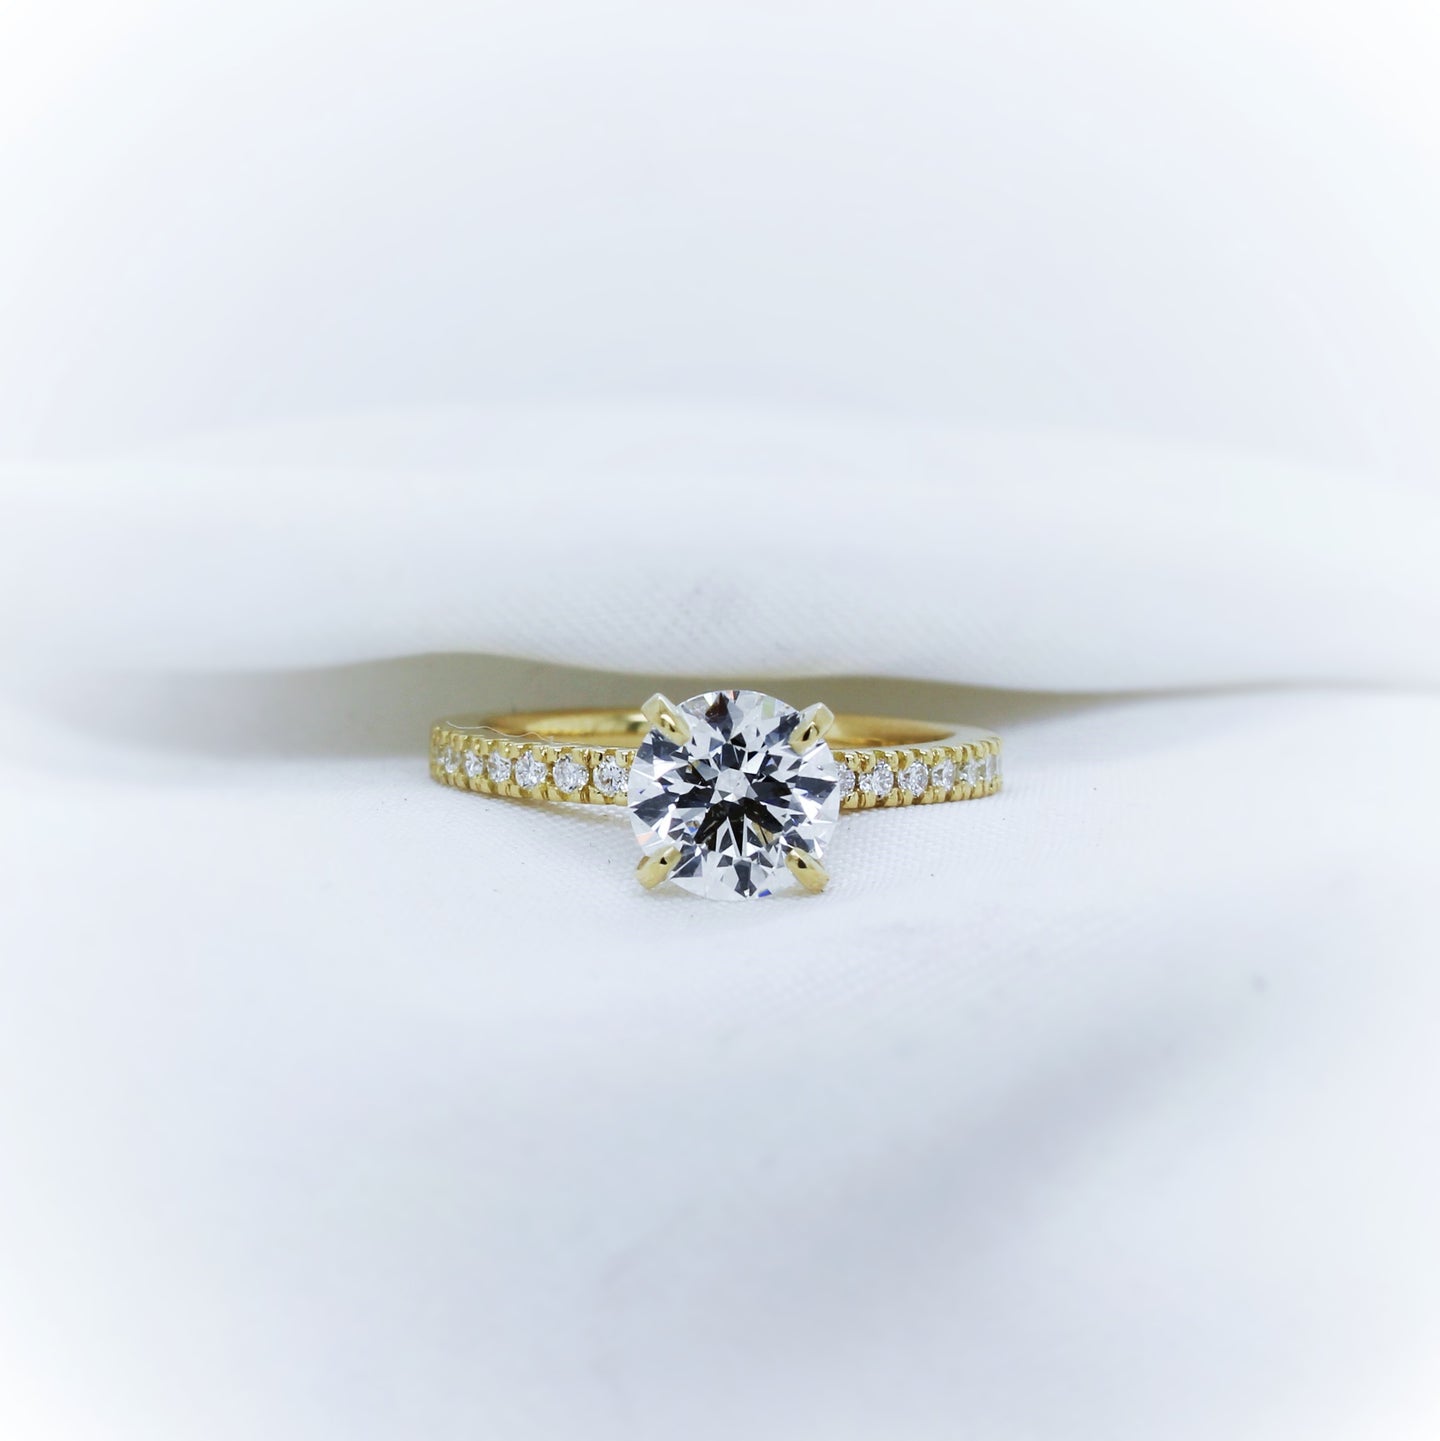 Shop Brisbane Engagement Rings Online Or Custom Design Your Engagement Ring At The French Door